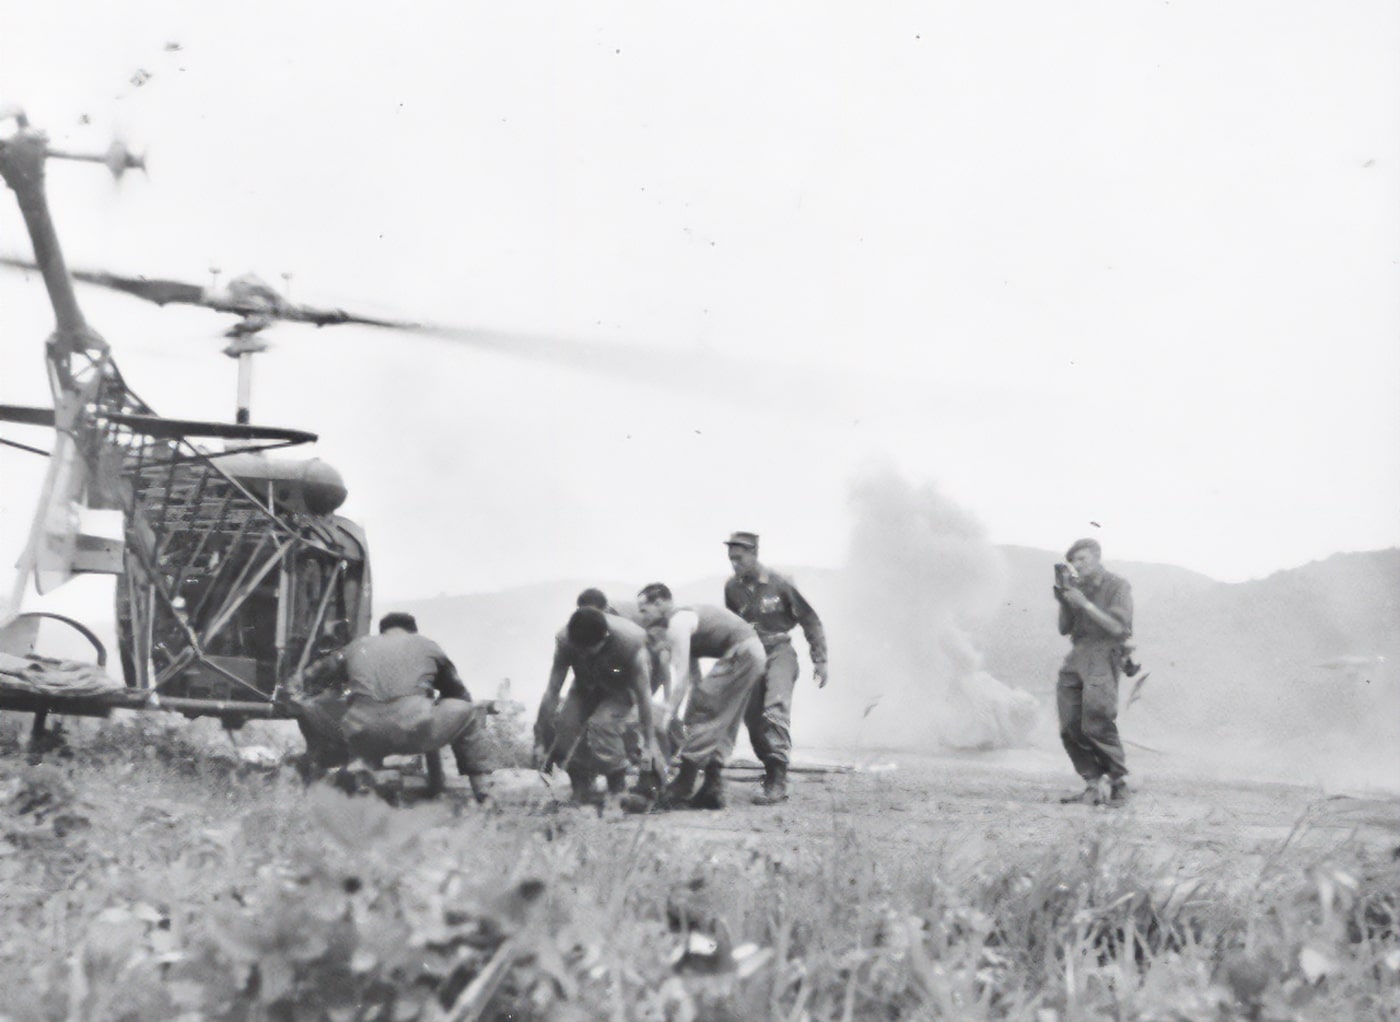 US Army Bell H-13 arrives at MASH unit as artillery explodes in background